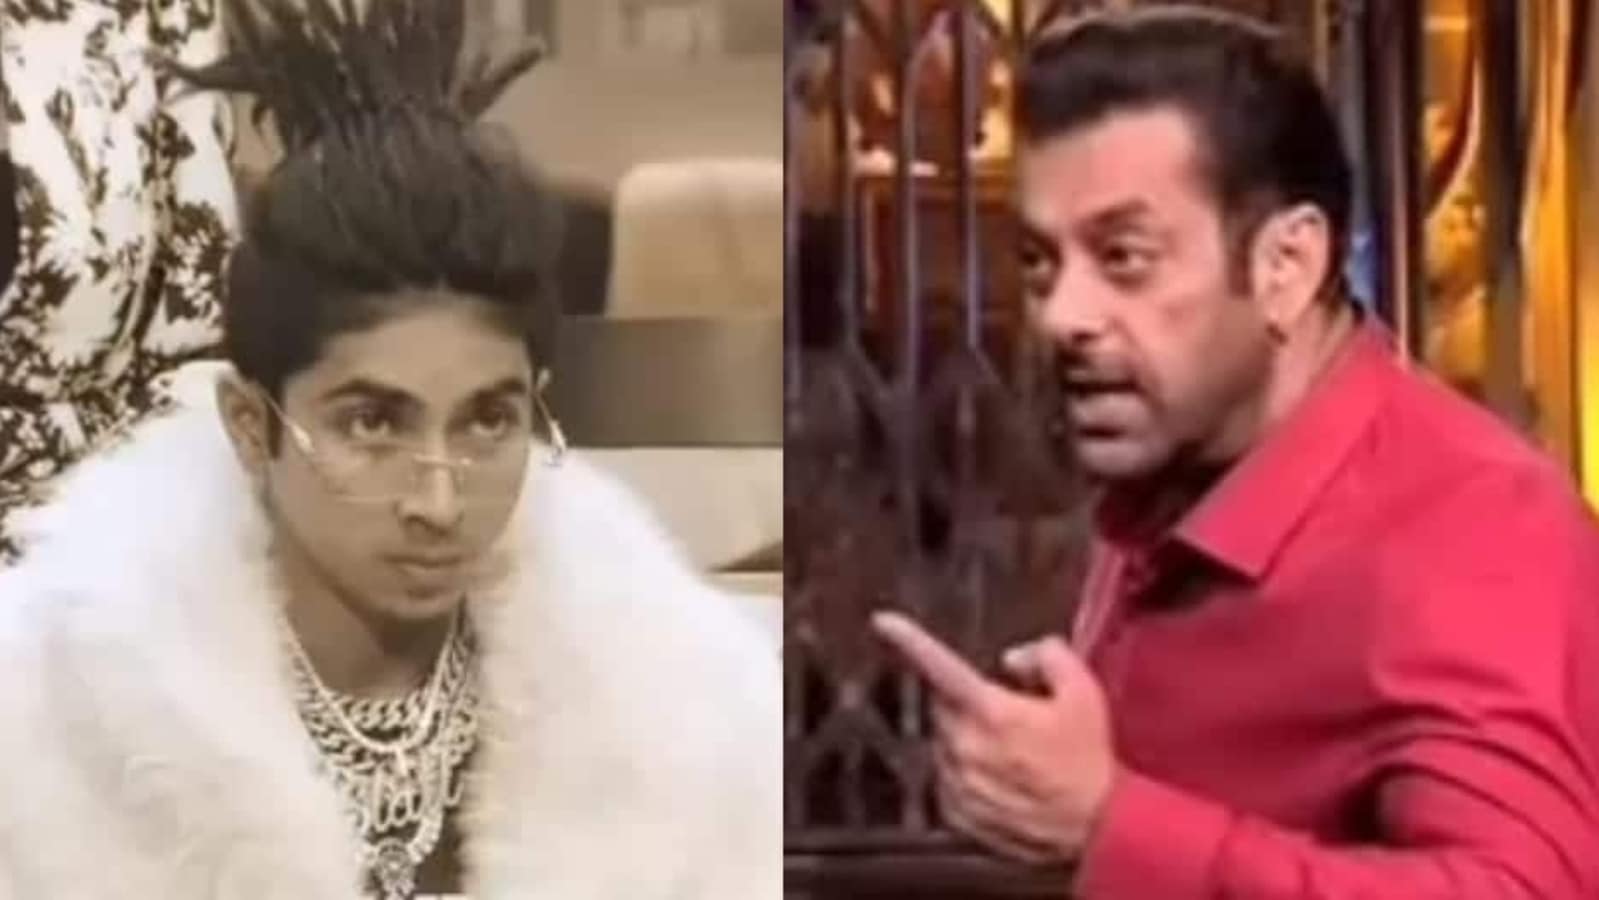 Salman Khan extends his support to MC Stan and bashes Shalin Bhanot and  Tina Dutta for purposely instigating him